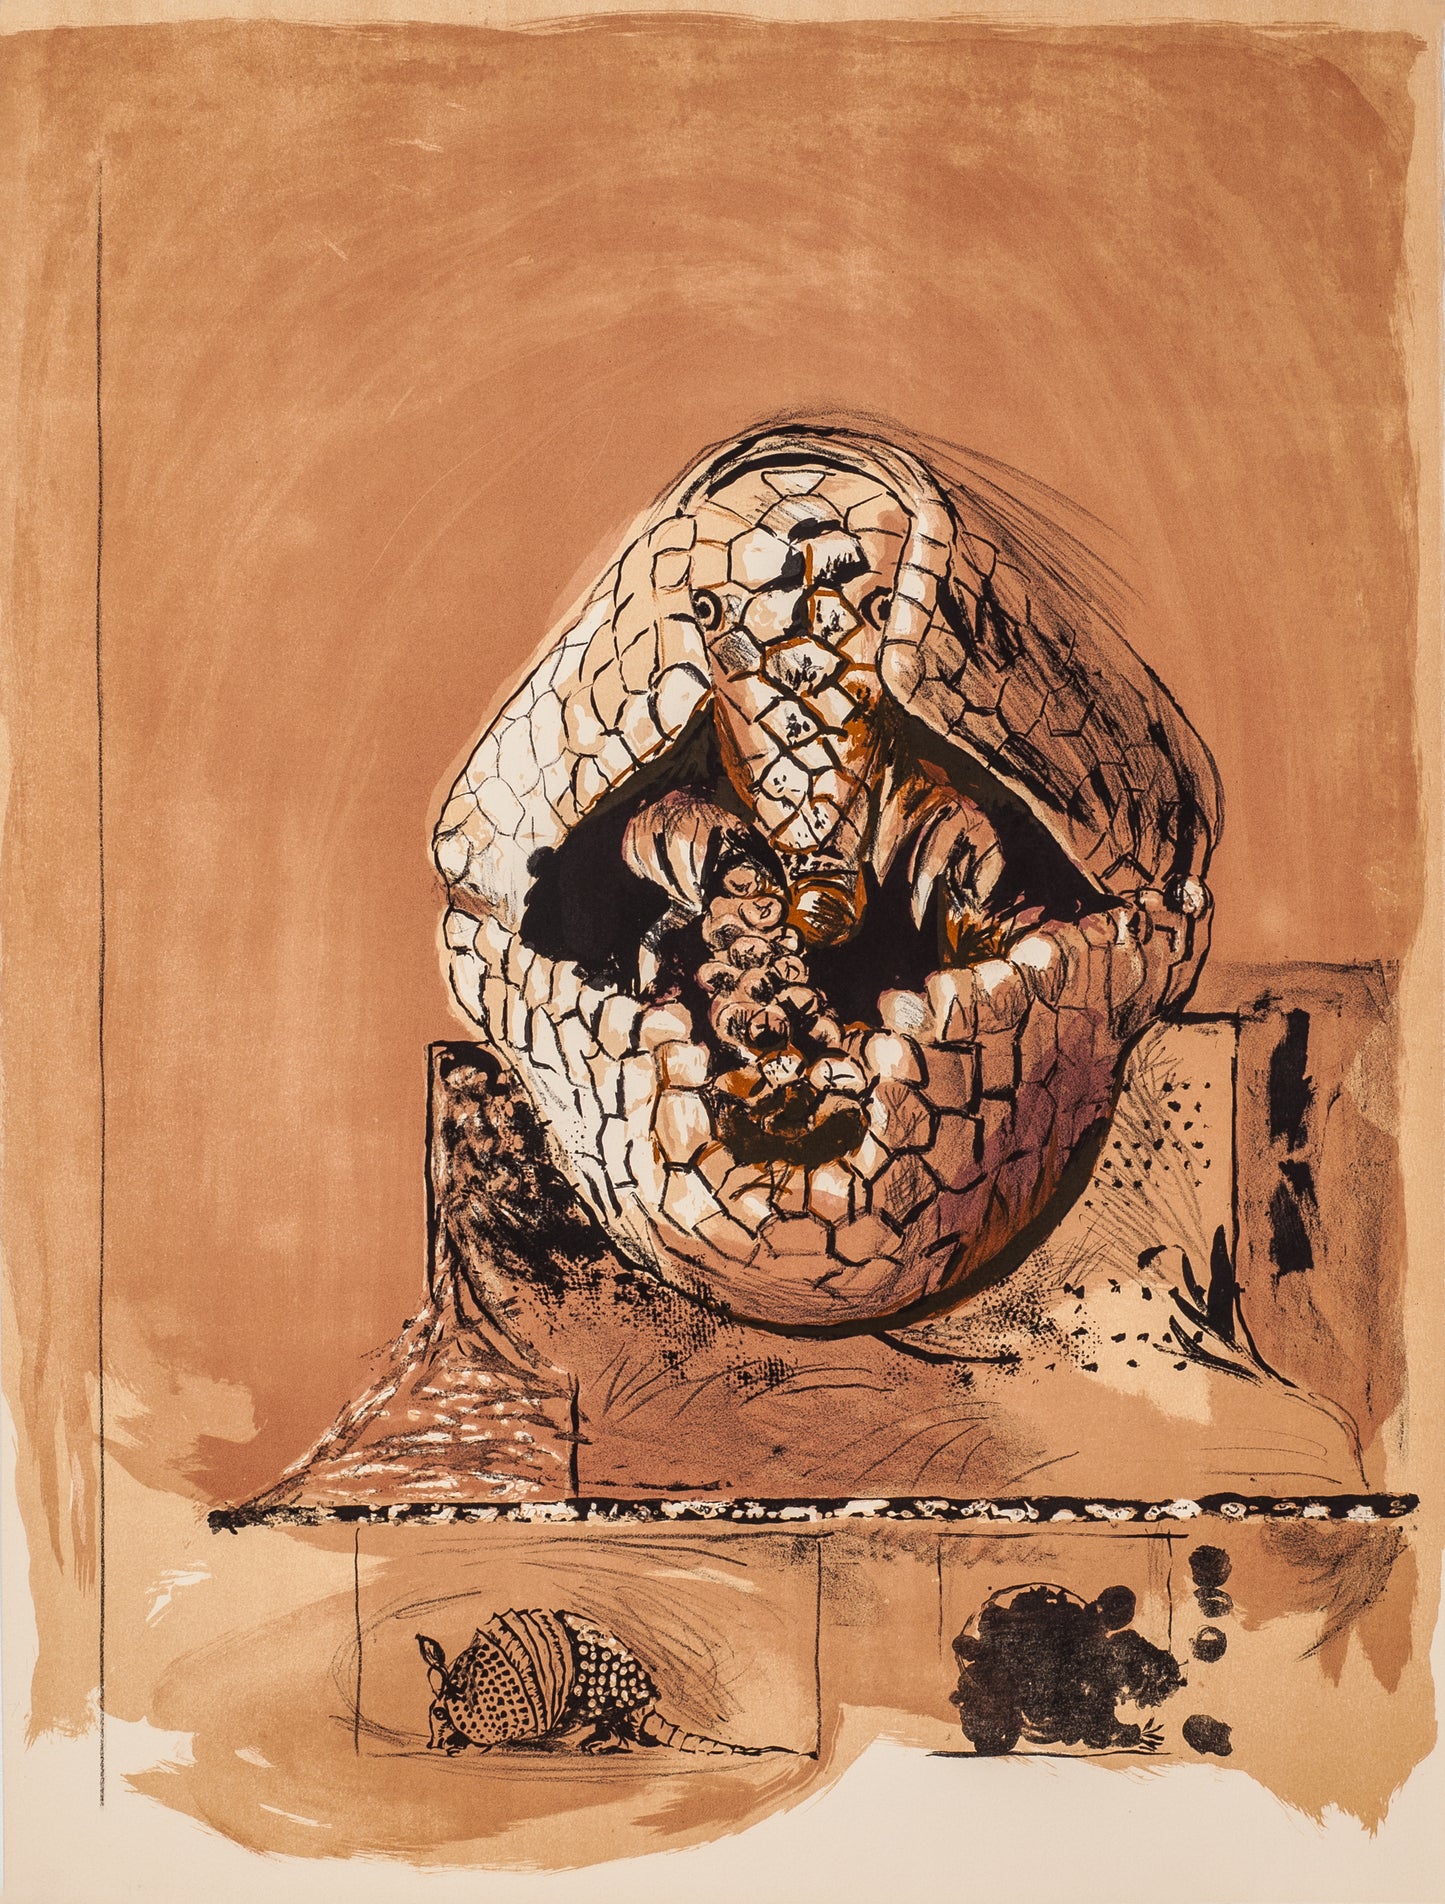 Armadillo by Graham Sutherland - Mourlot Editions - Fine_Art - Poster - Lithograph - Wall Art - Vintage - Prints - Original